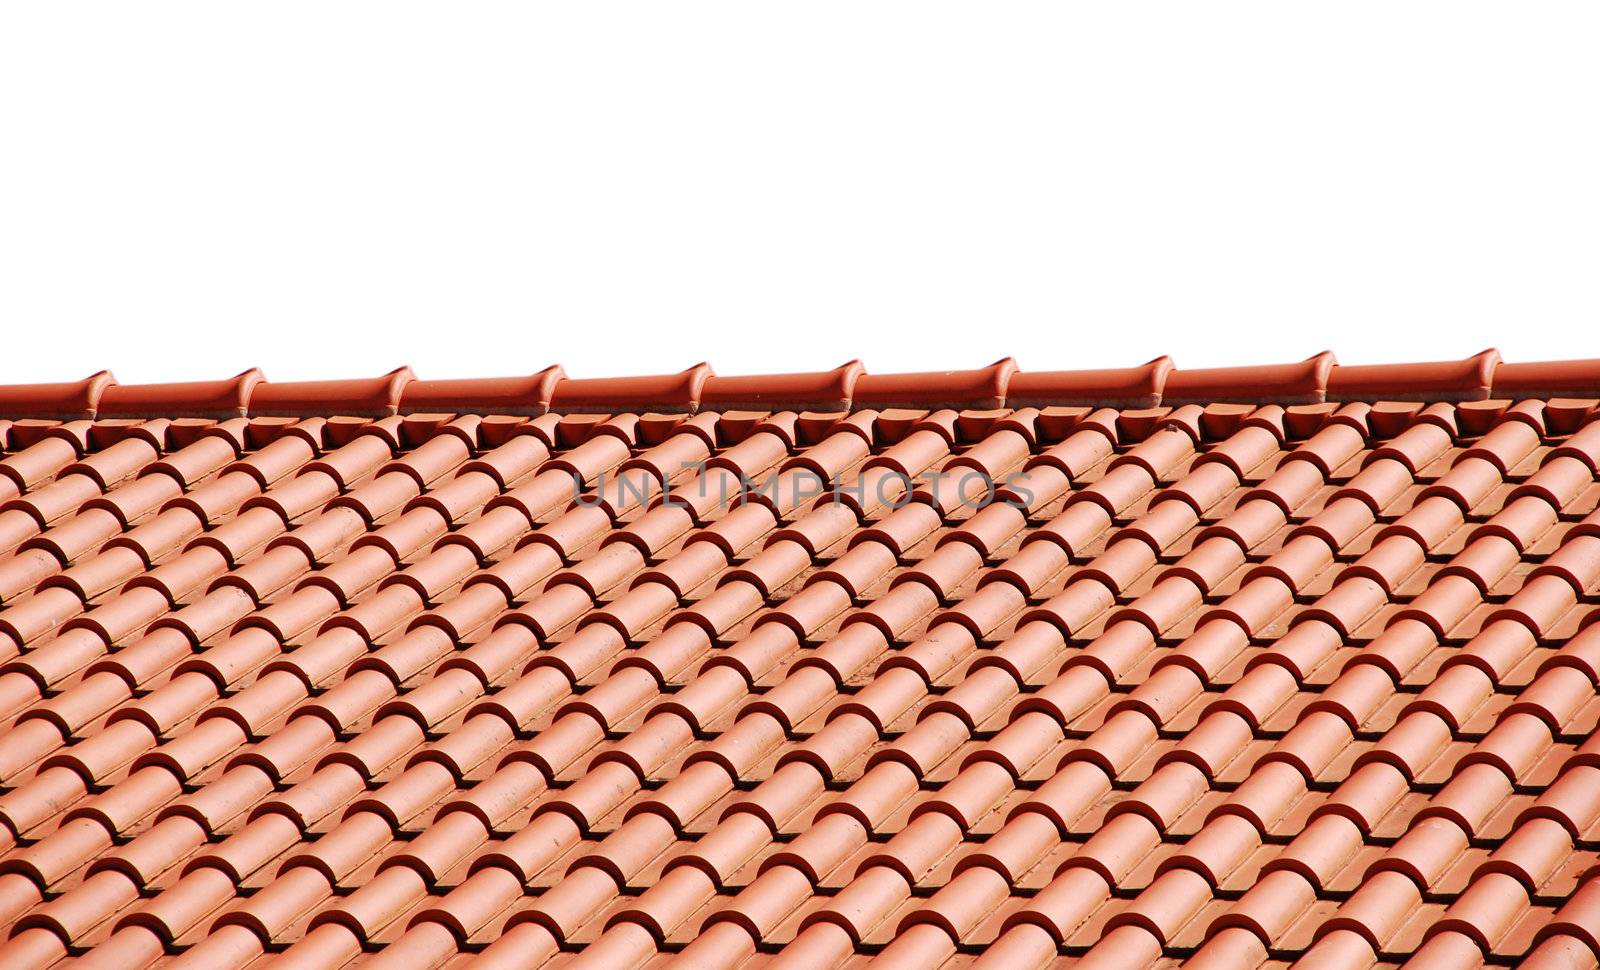 Roof tiles by luissantos84